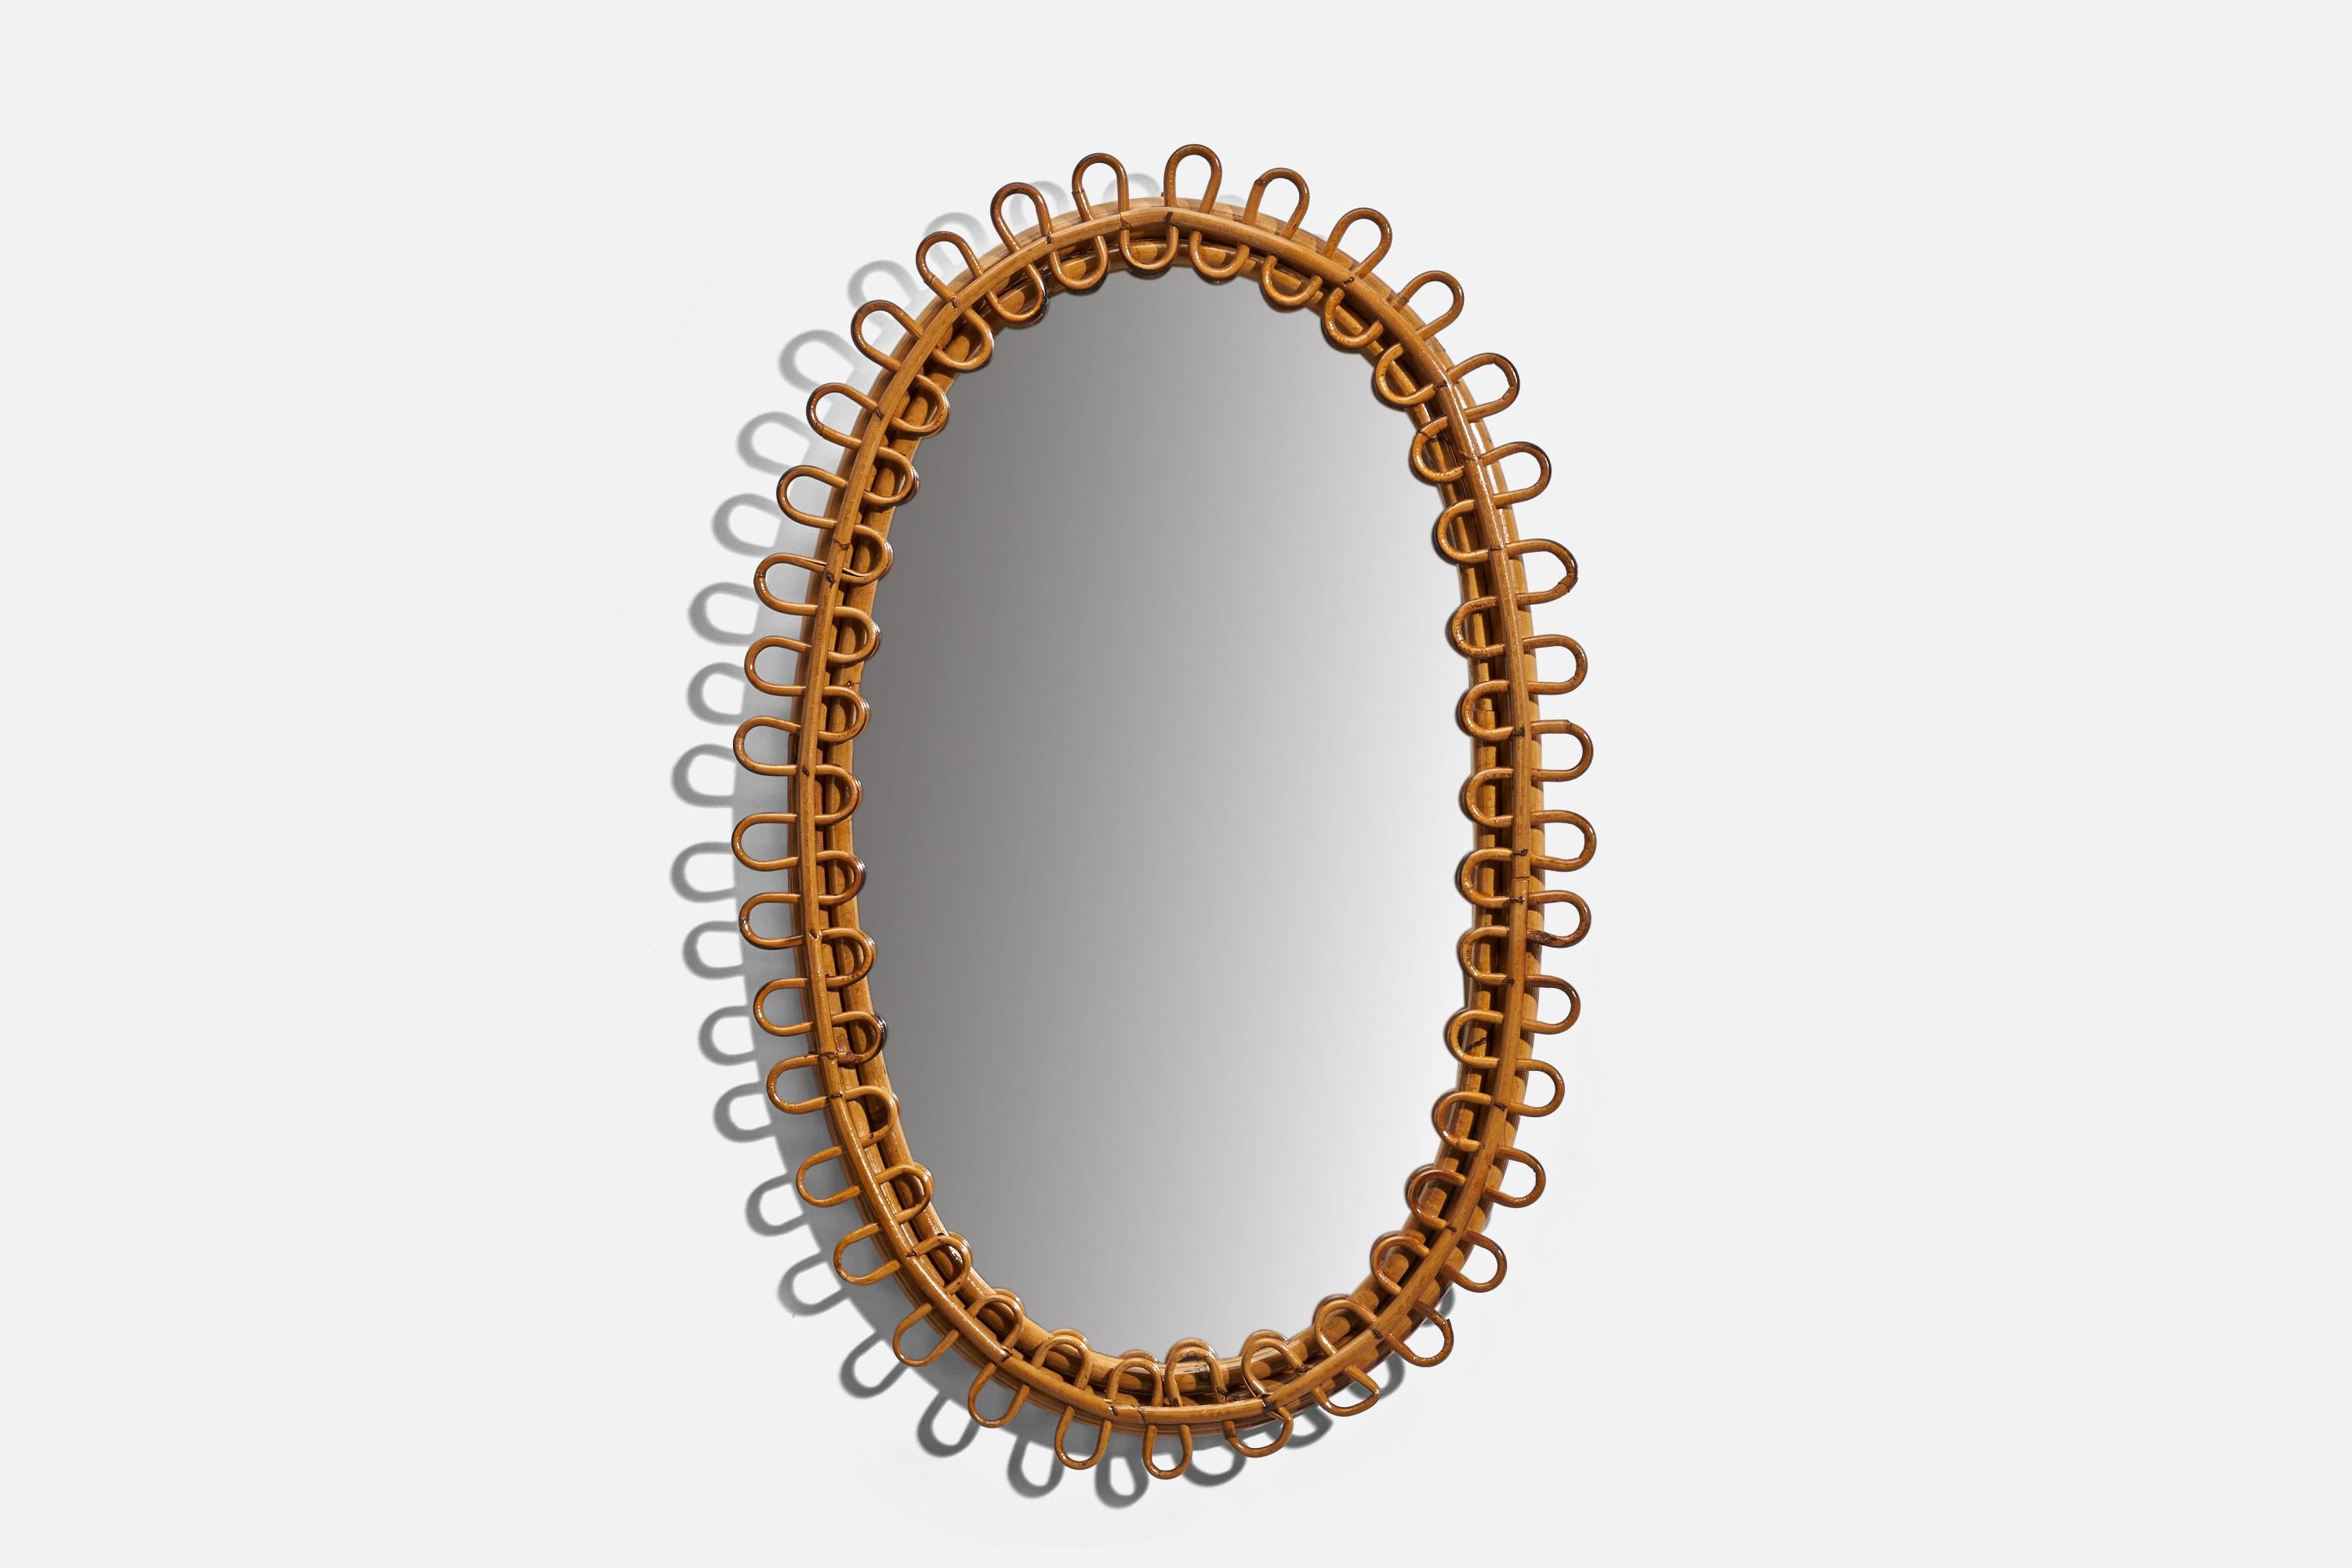 An oval, rattan wall mirror designed and produced by an Italian designer, Italy, 1950s-1960s.
  